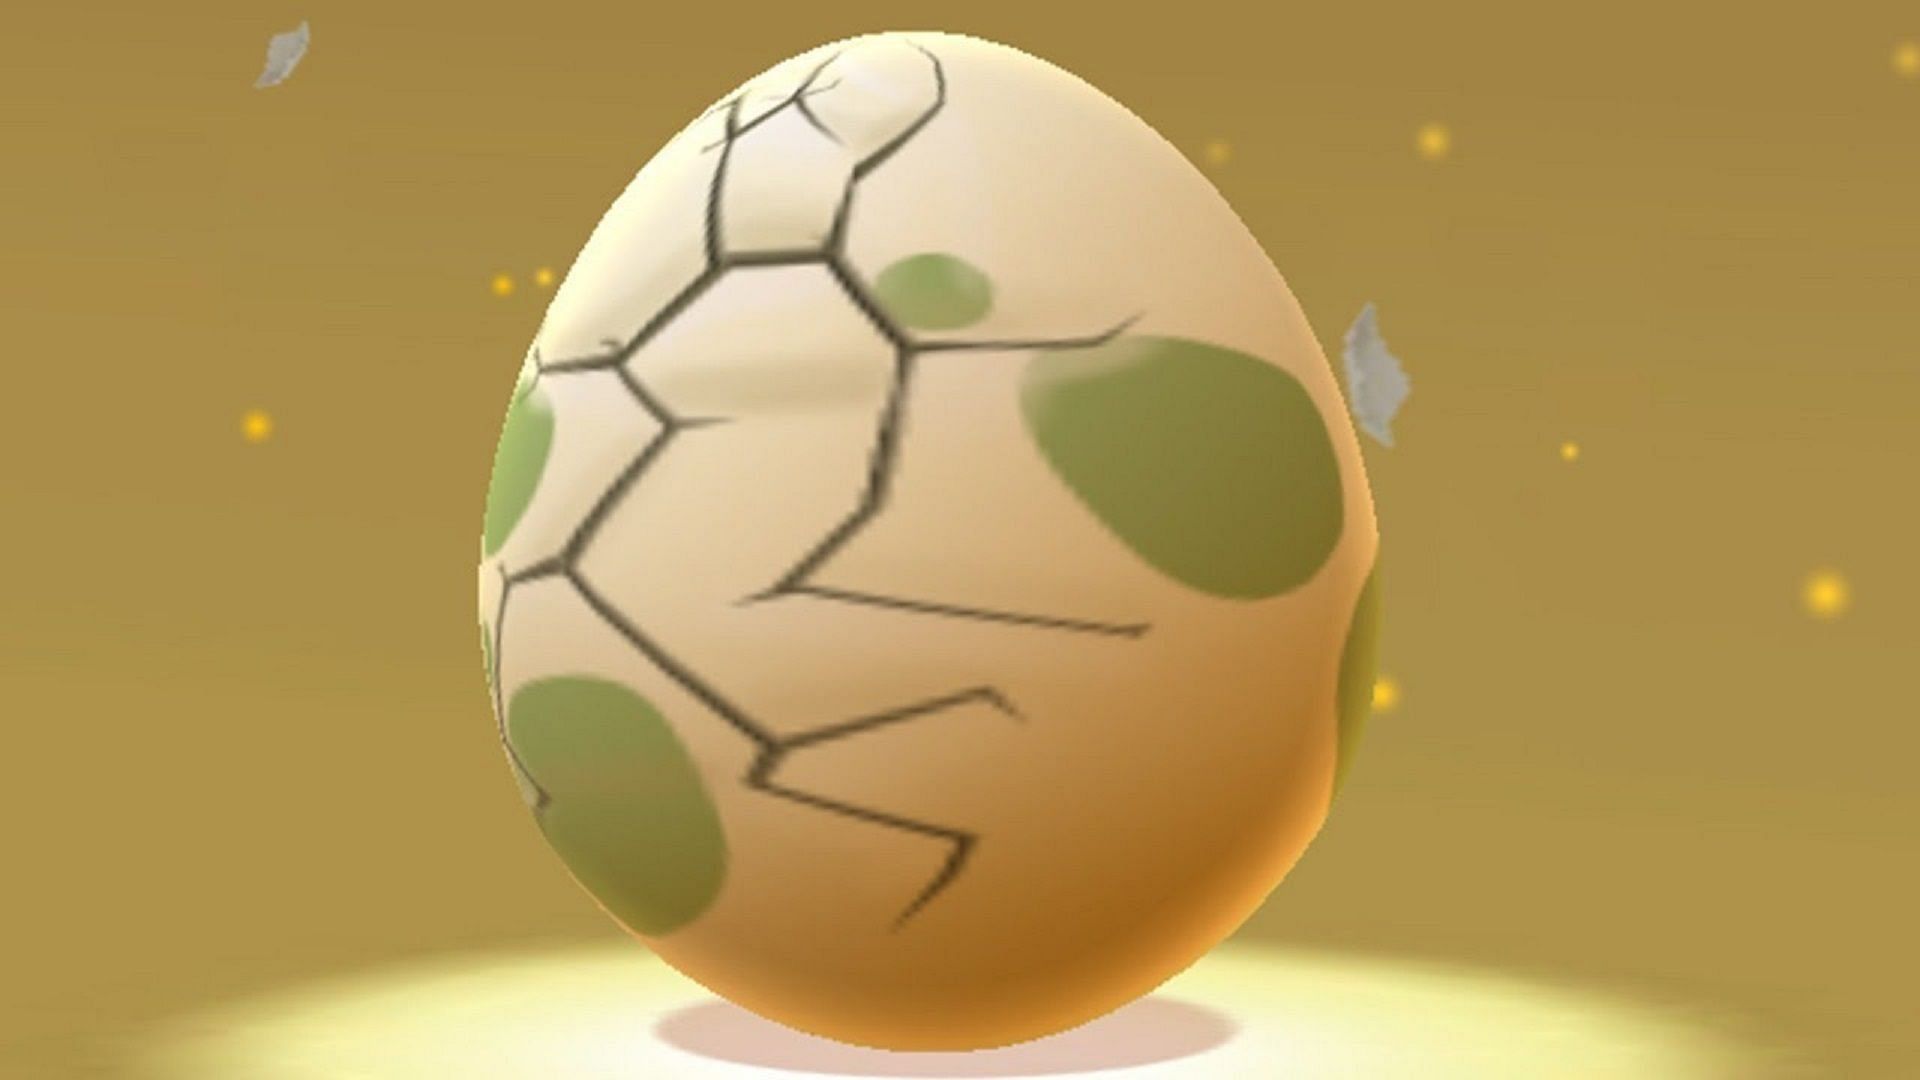 Keeping an eye on egg-hatching progress can be done in many ways in Pokemon GO (Image via Niantic)